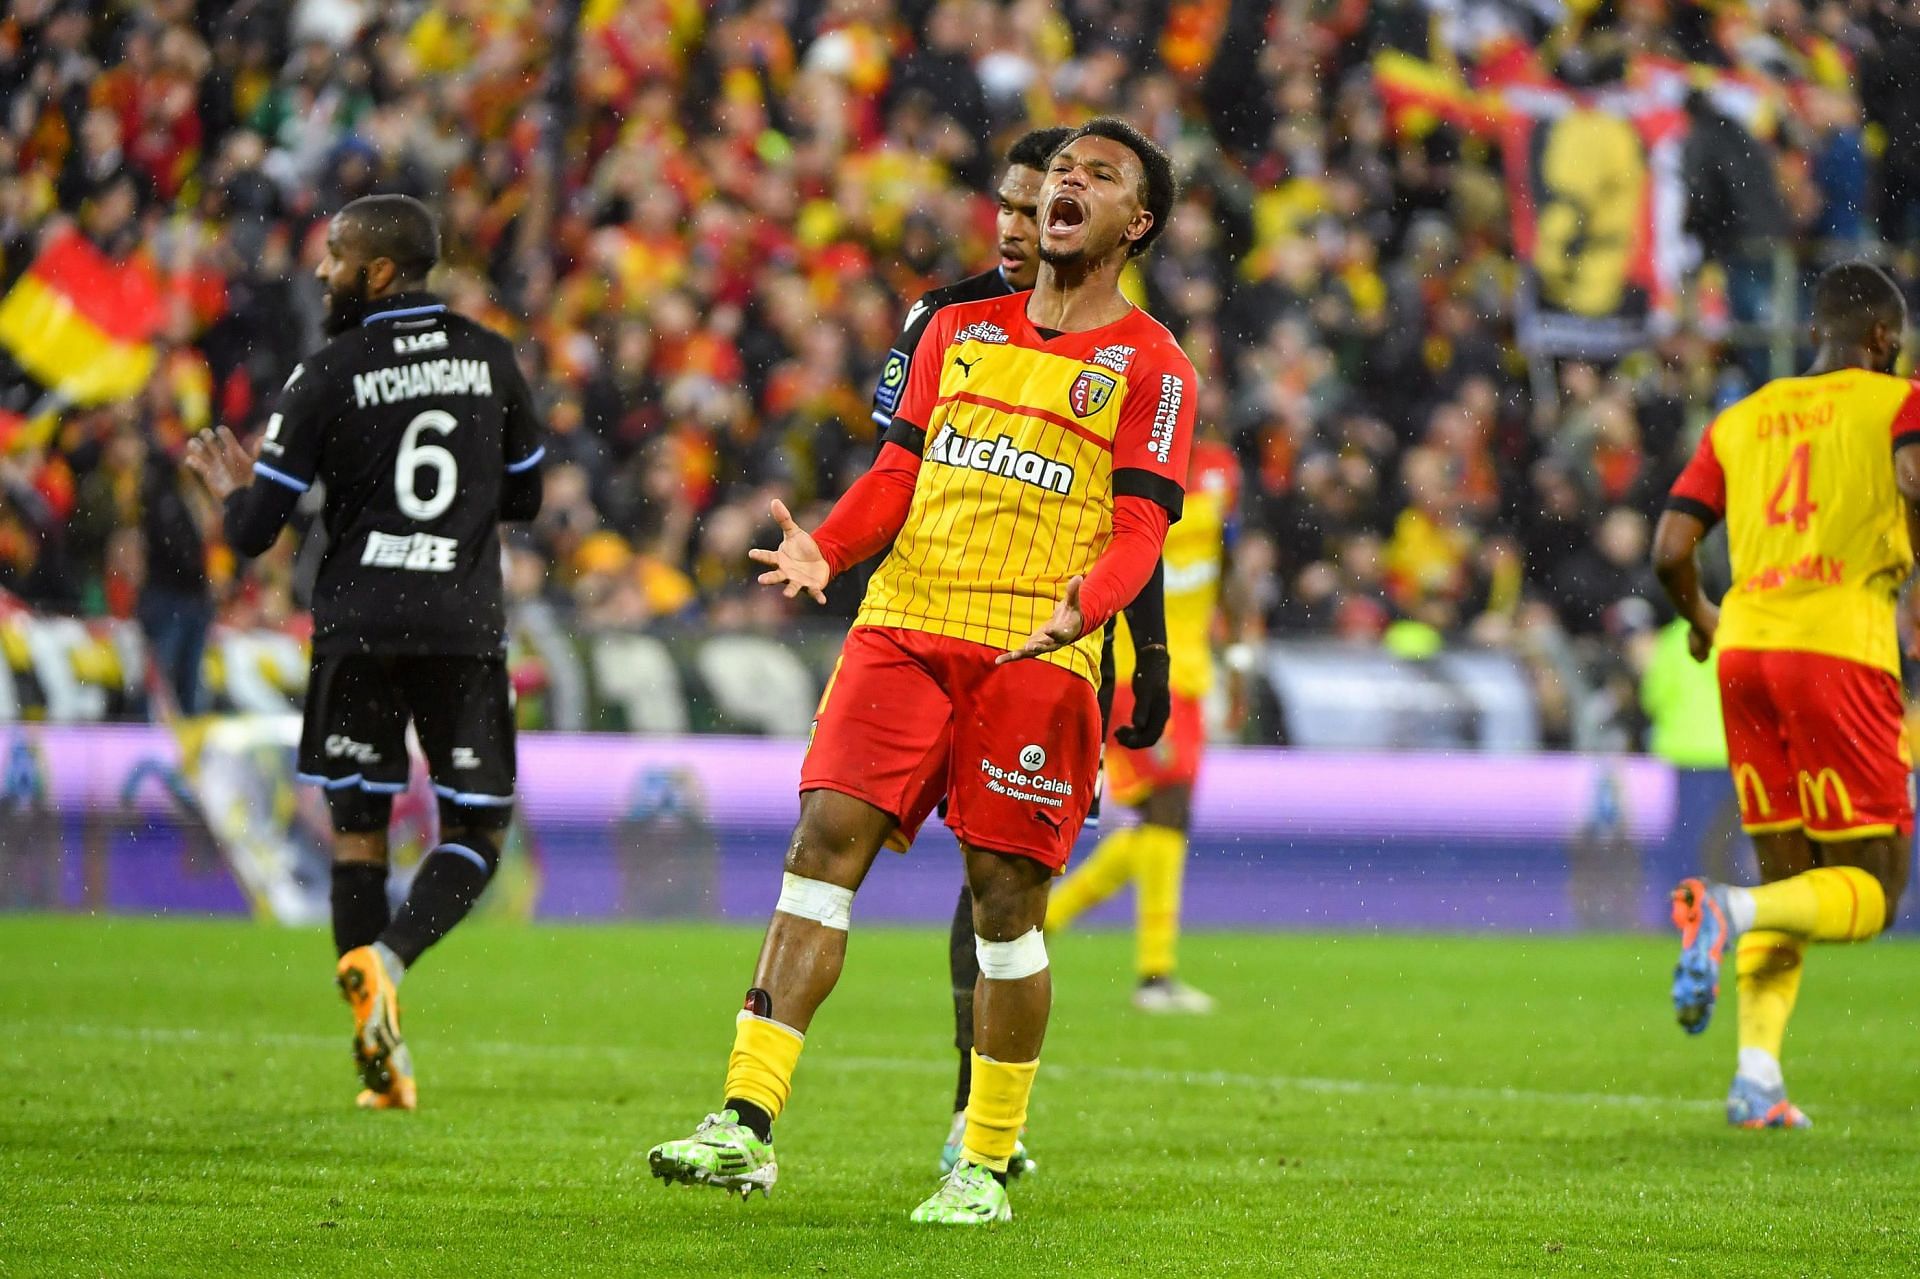 Lens will take on Monaco in Ligue 1 on Saturday